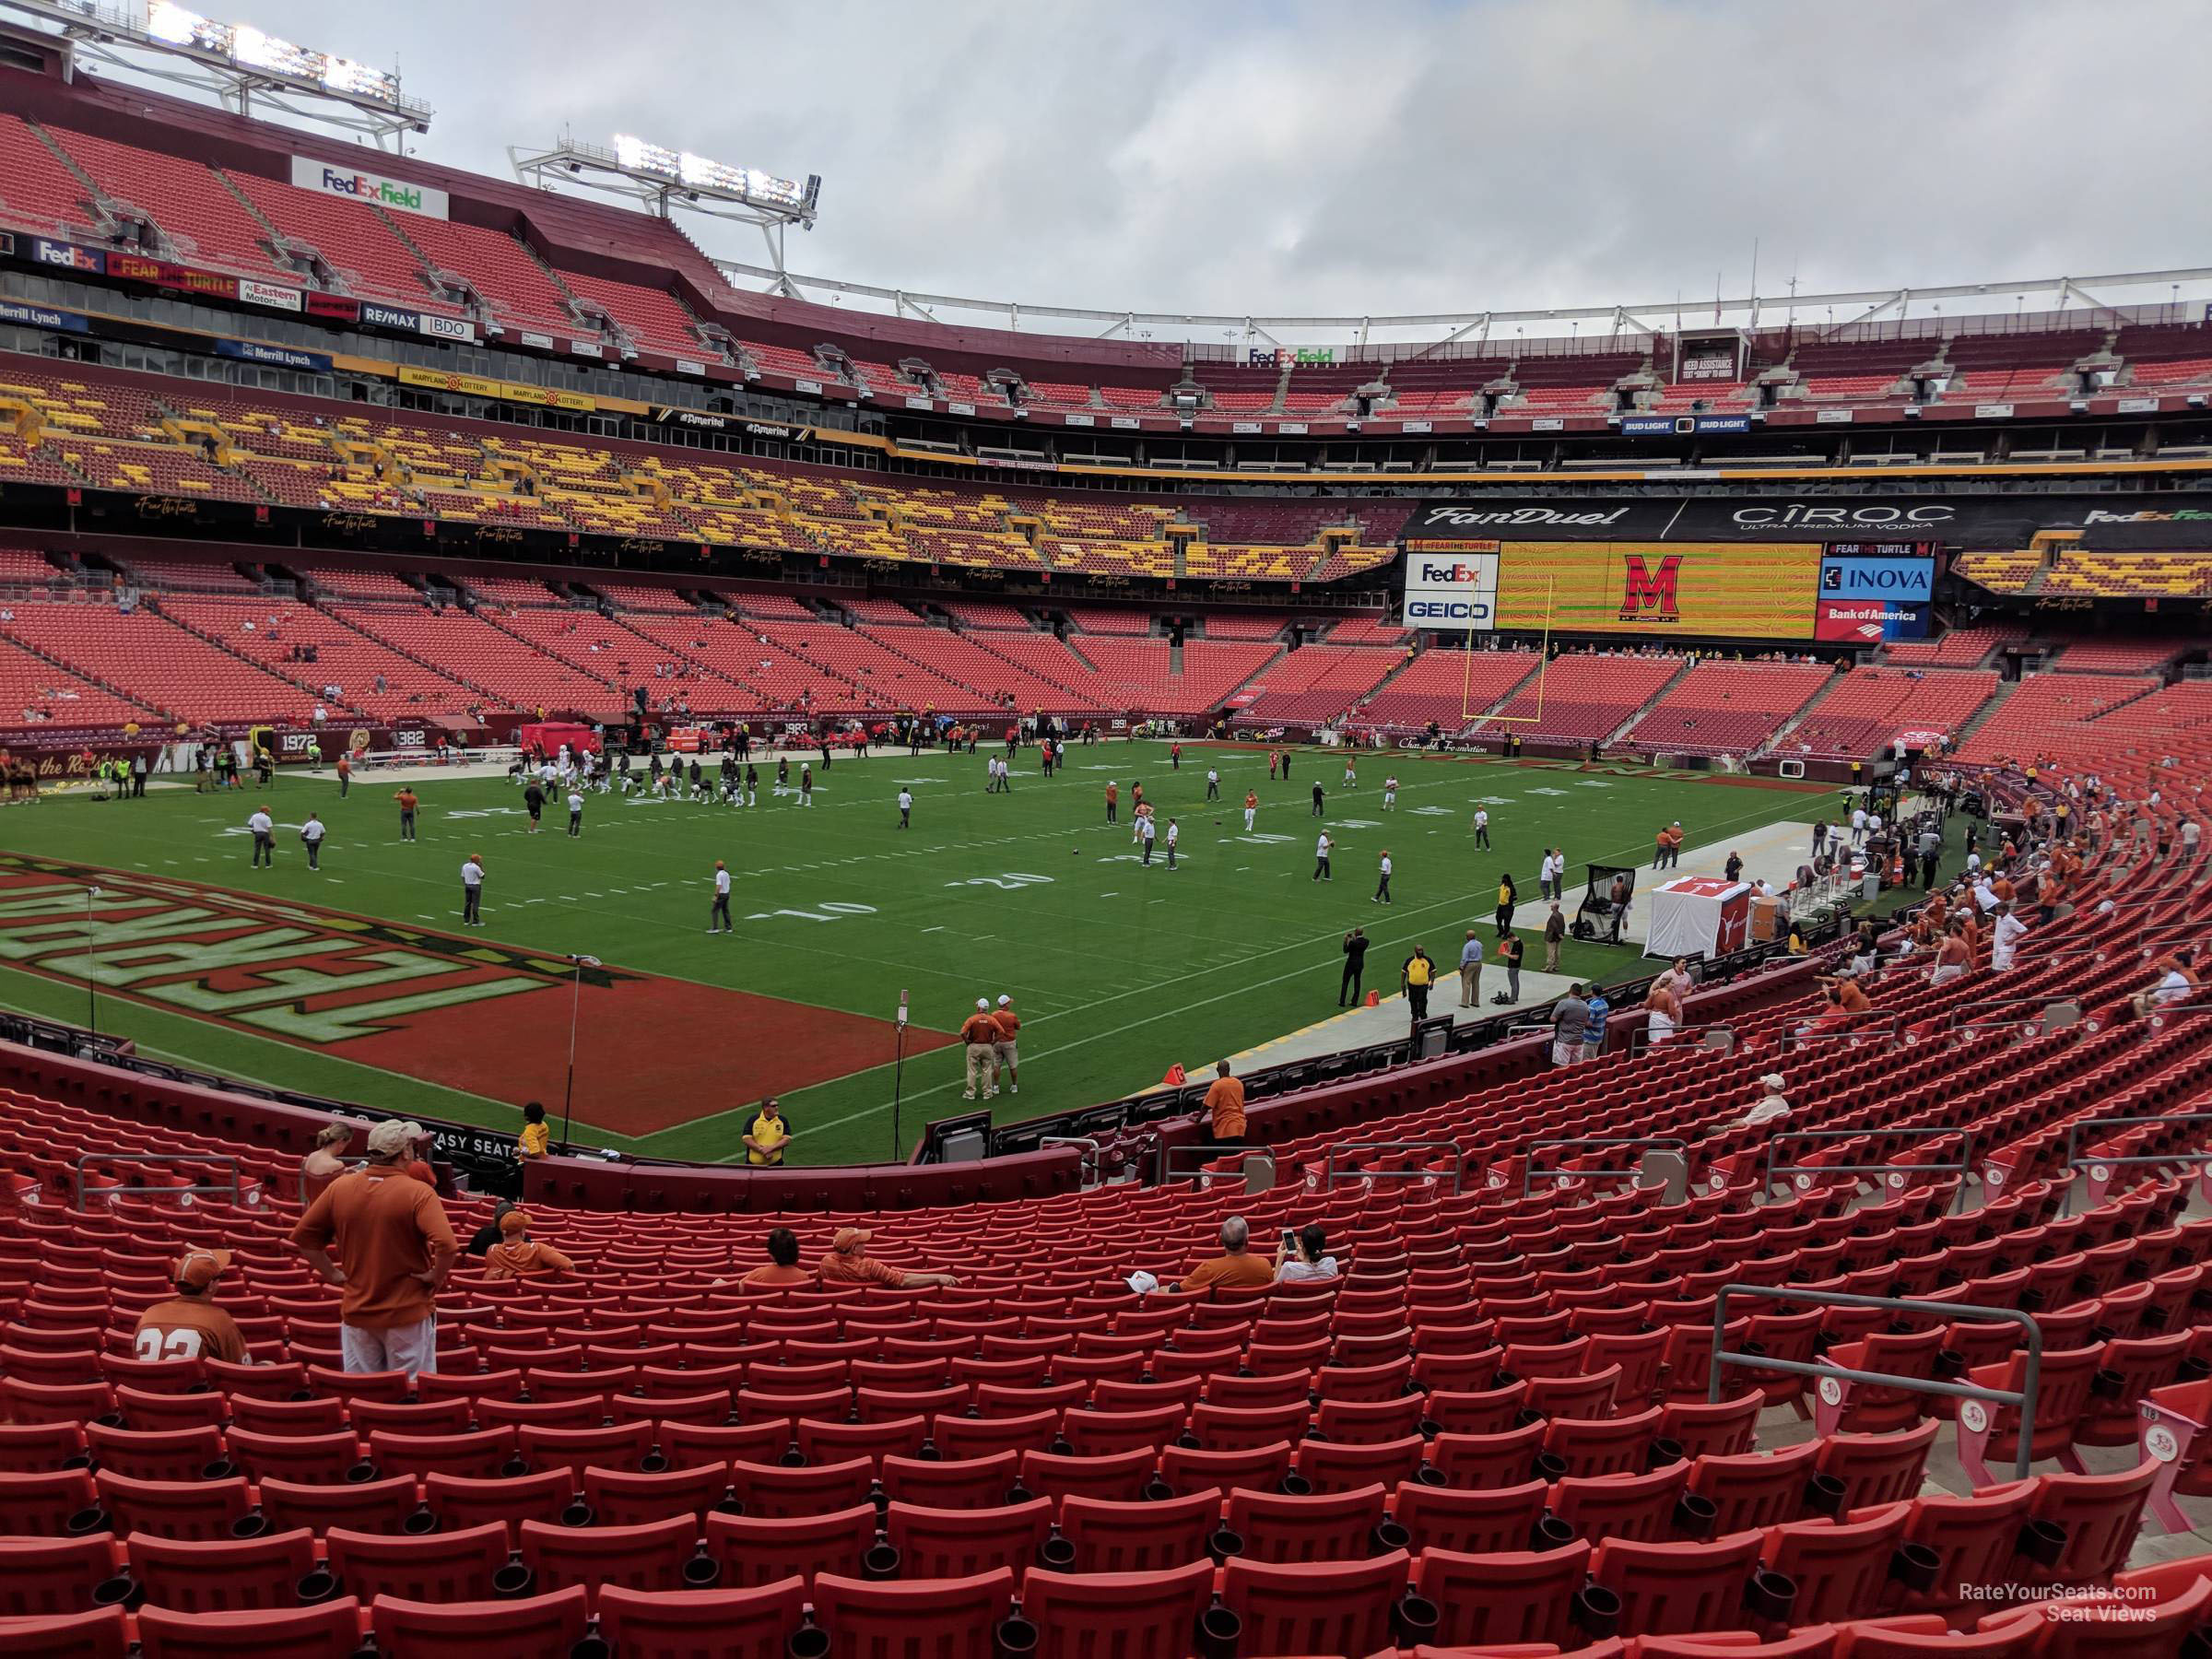 section 128, row 25 seat view  - fedexfield